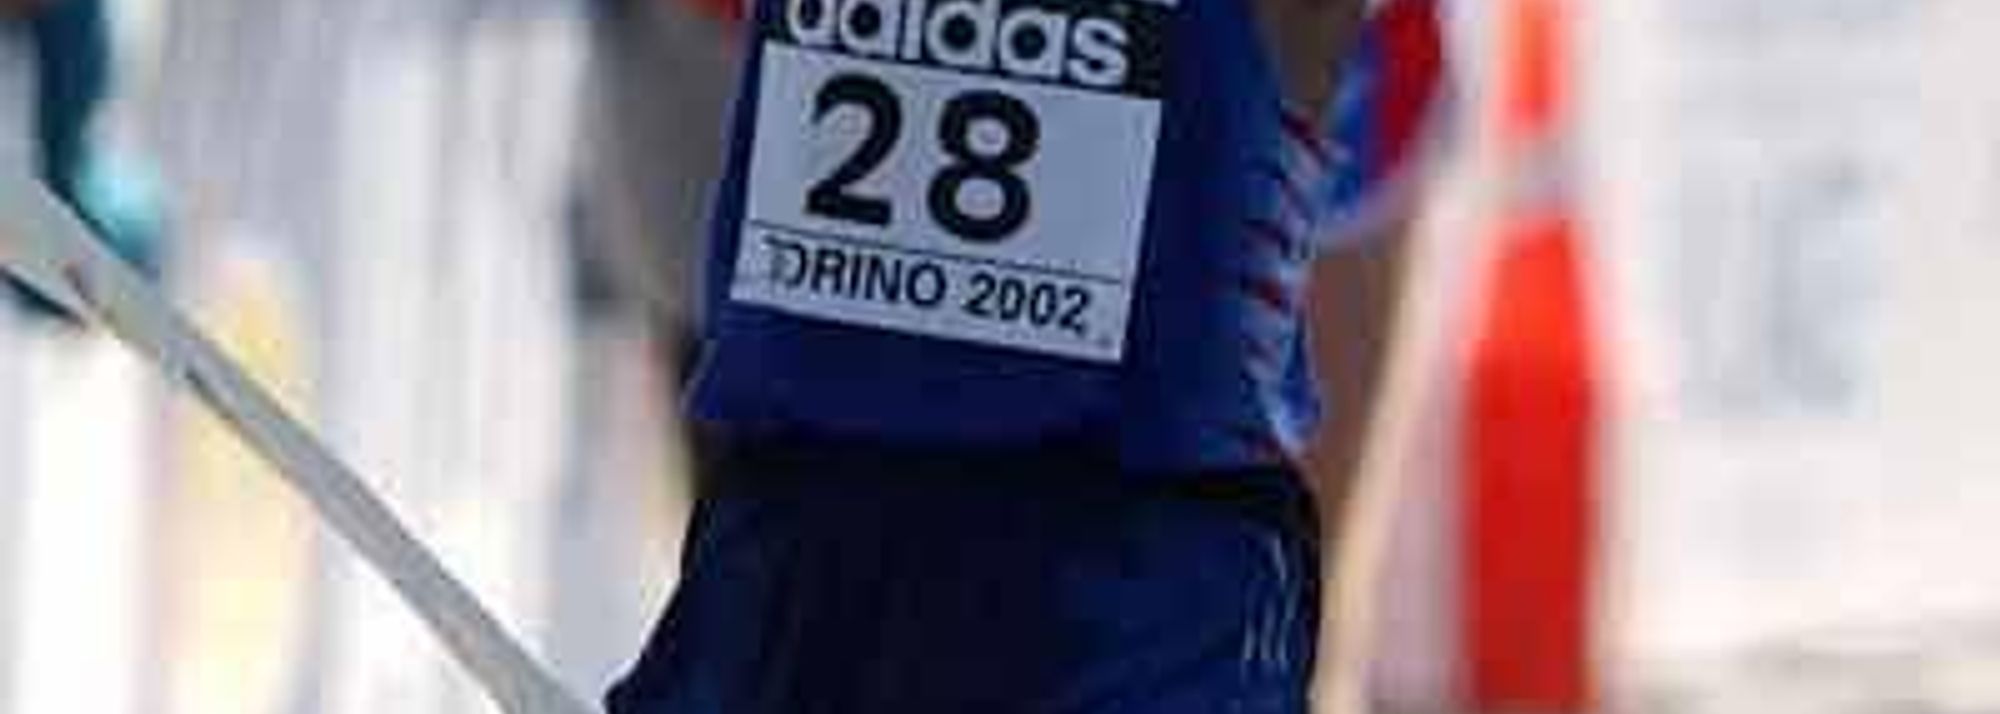 Ecuador's 1996 Olympic Champion Jefferson Perez came back after five years of off-par performances to win the men's 20km race in Torino in the last 50 metres.